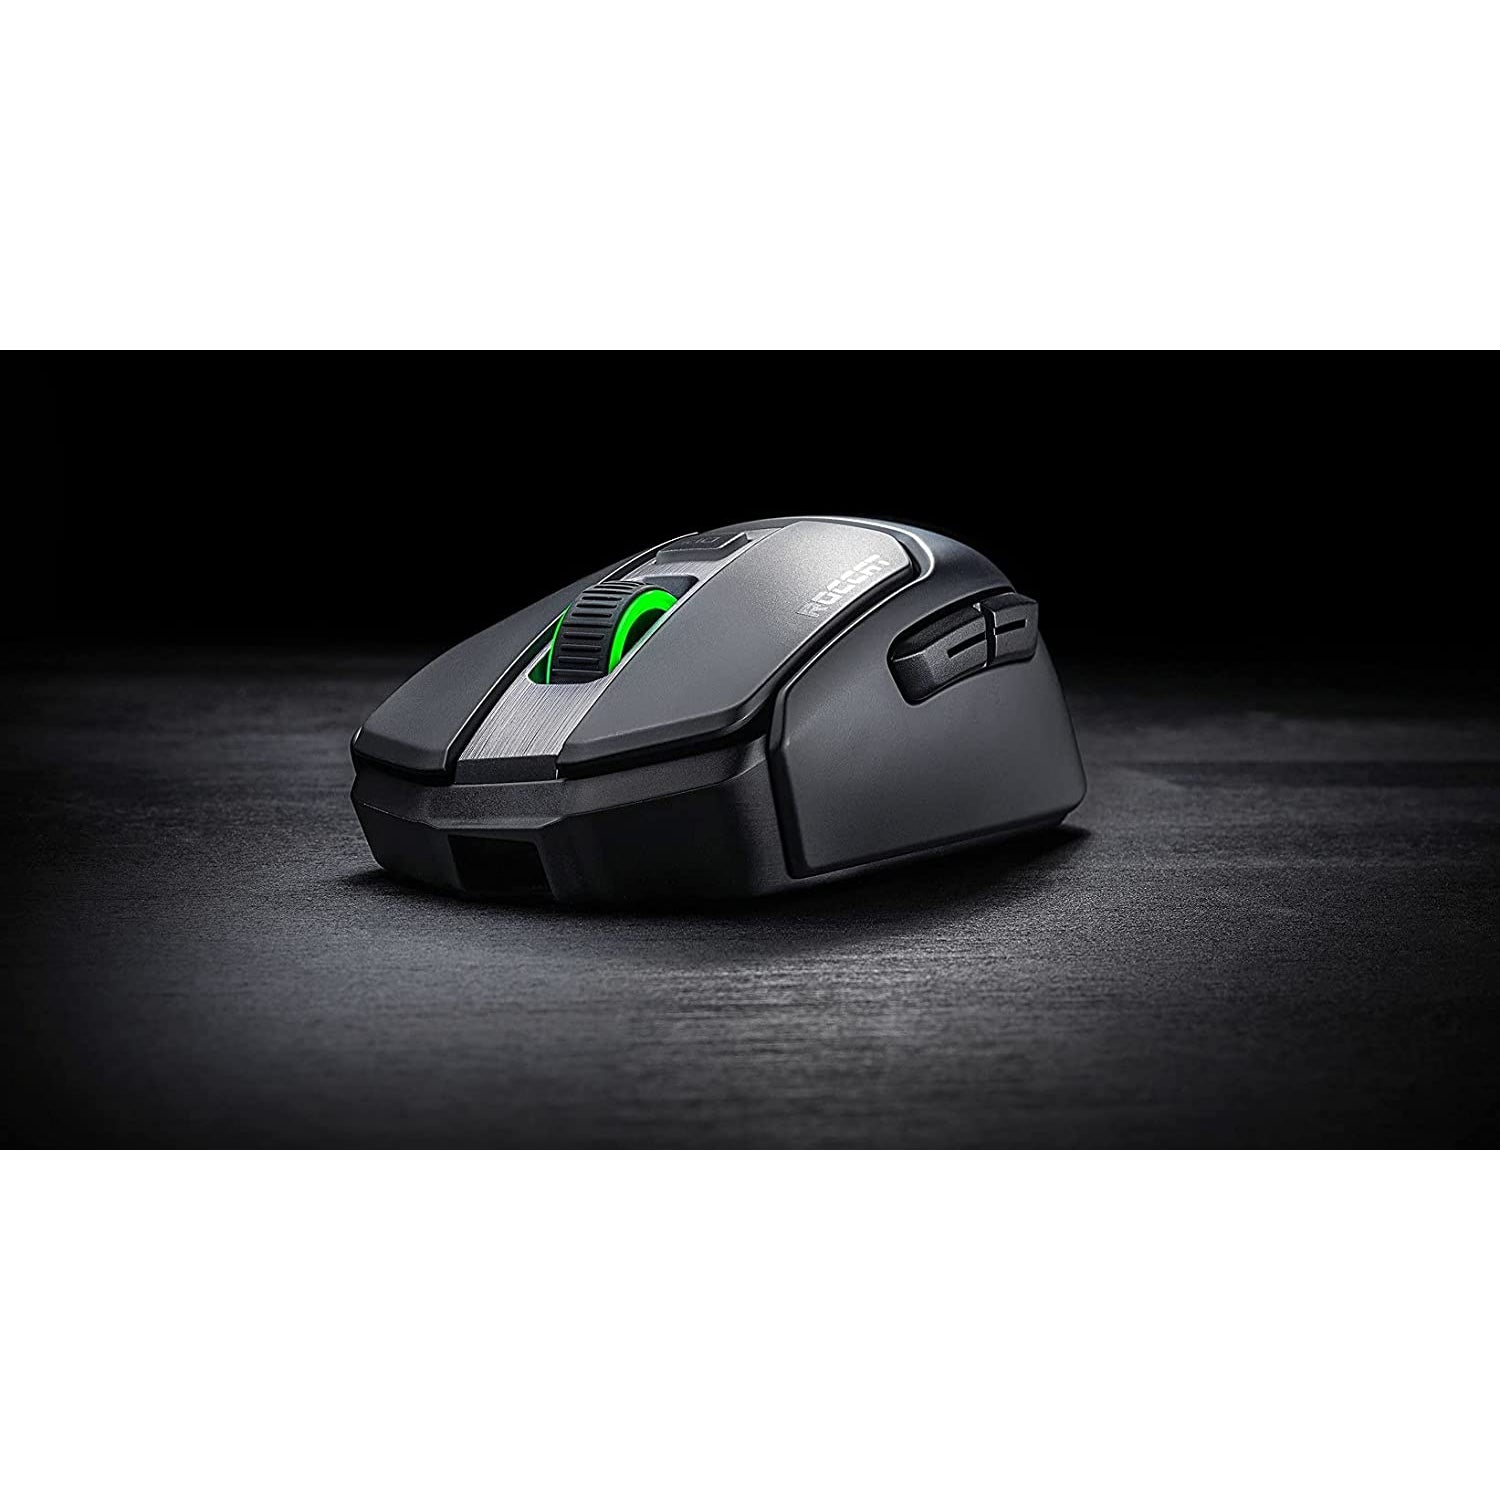 Roccat Kain 200 Aimo RGB Wireless Gaming Mouse - Black